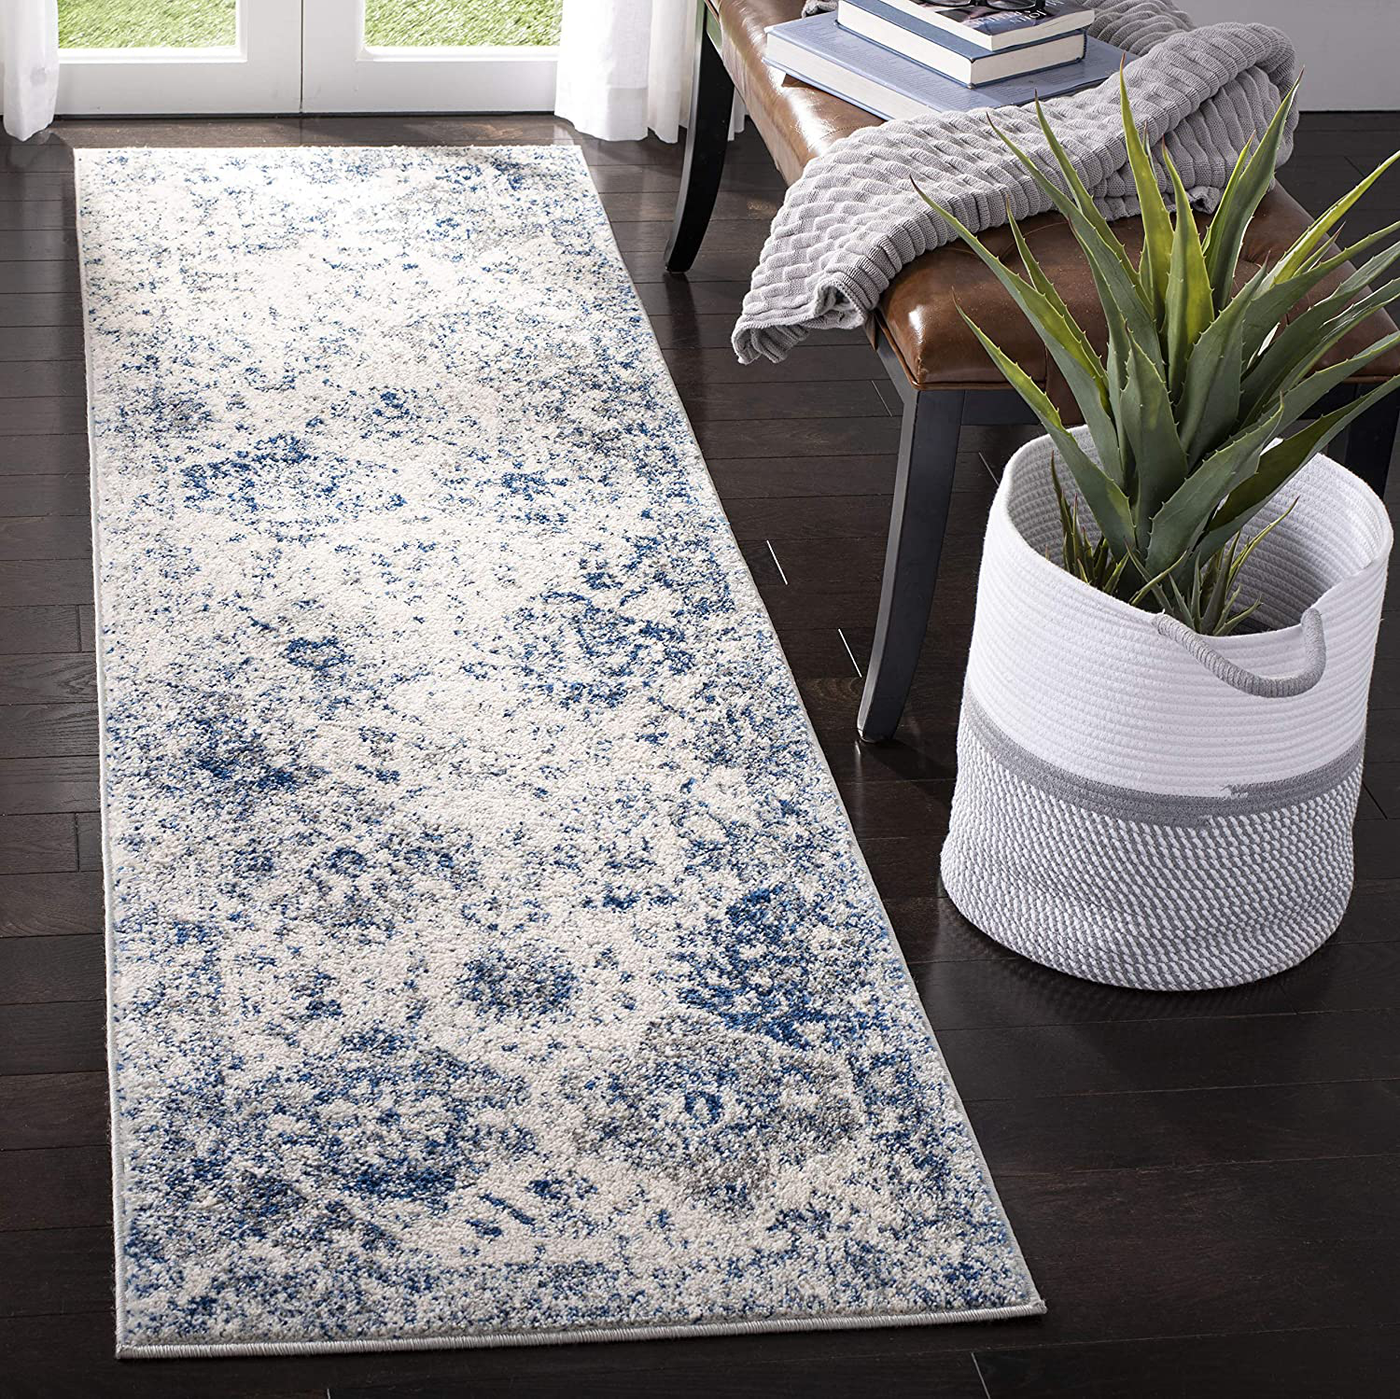 Safavieh Madison Collection MAD611C Boho Chic Floral Medallion Trellis Distressed Non-Shedding Stain Resistant Living Room Bedroom Runner, 2'3" x 6' , White / Royal Blue